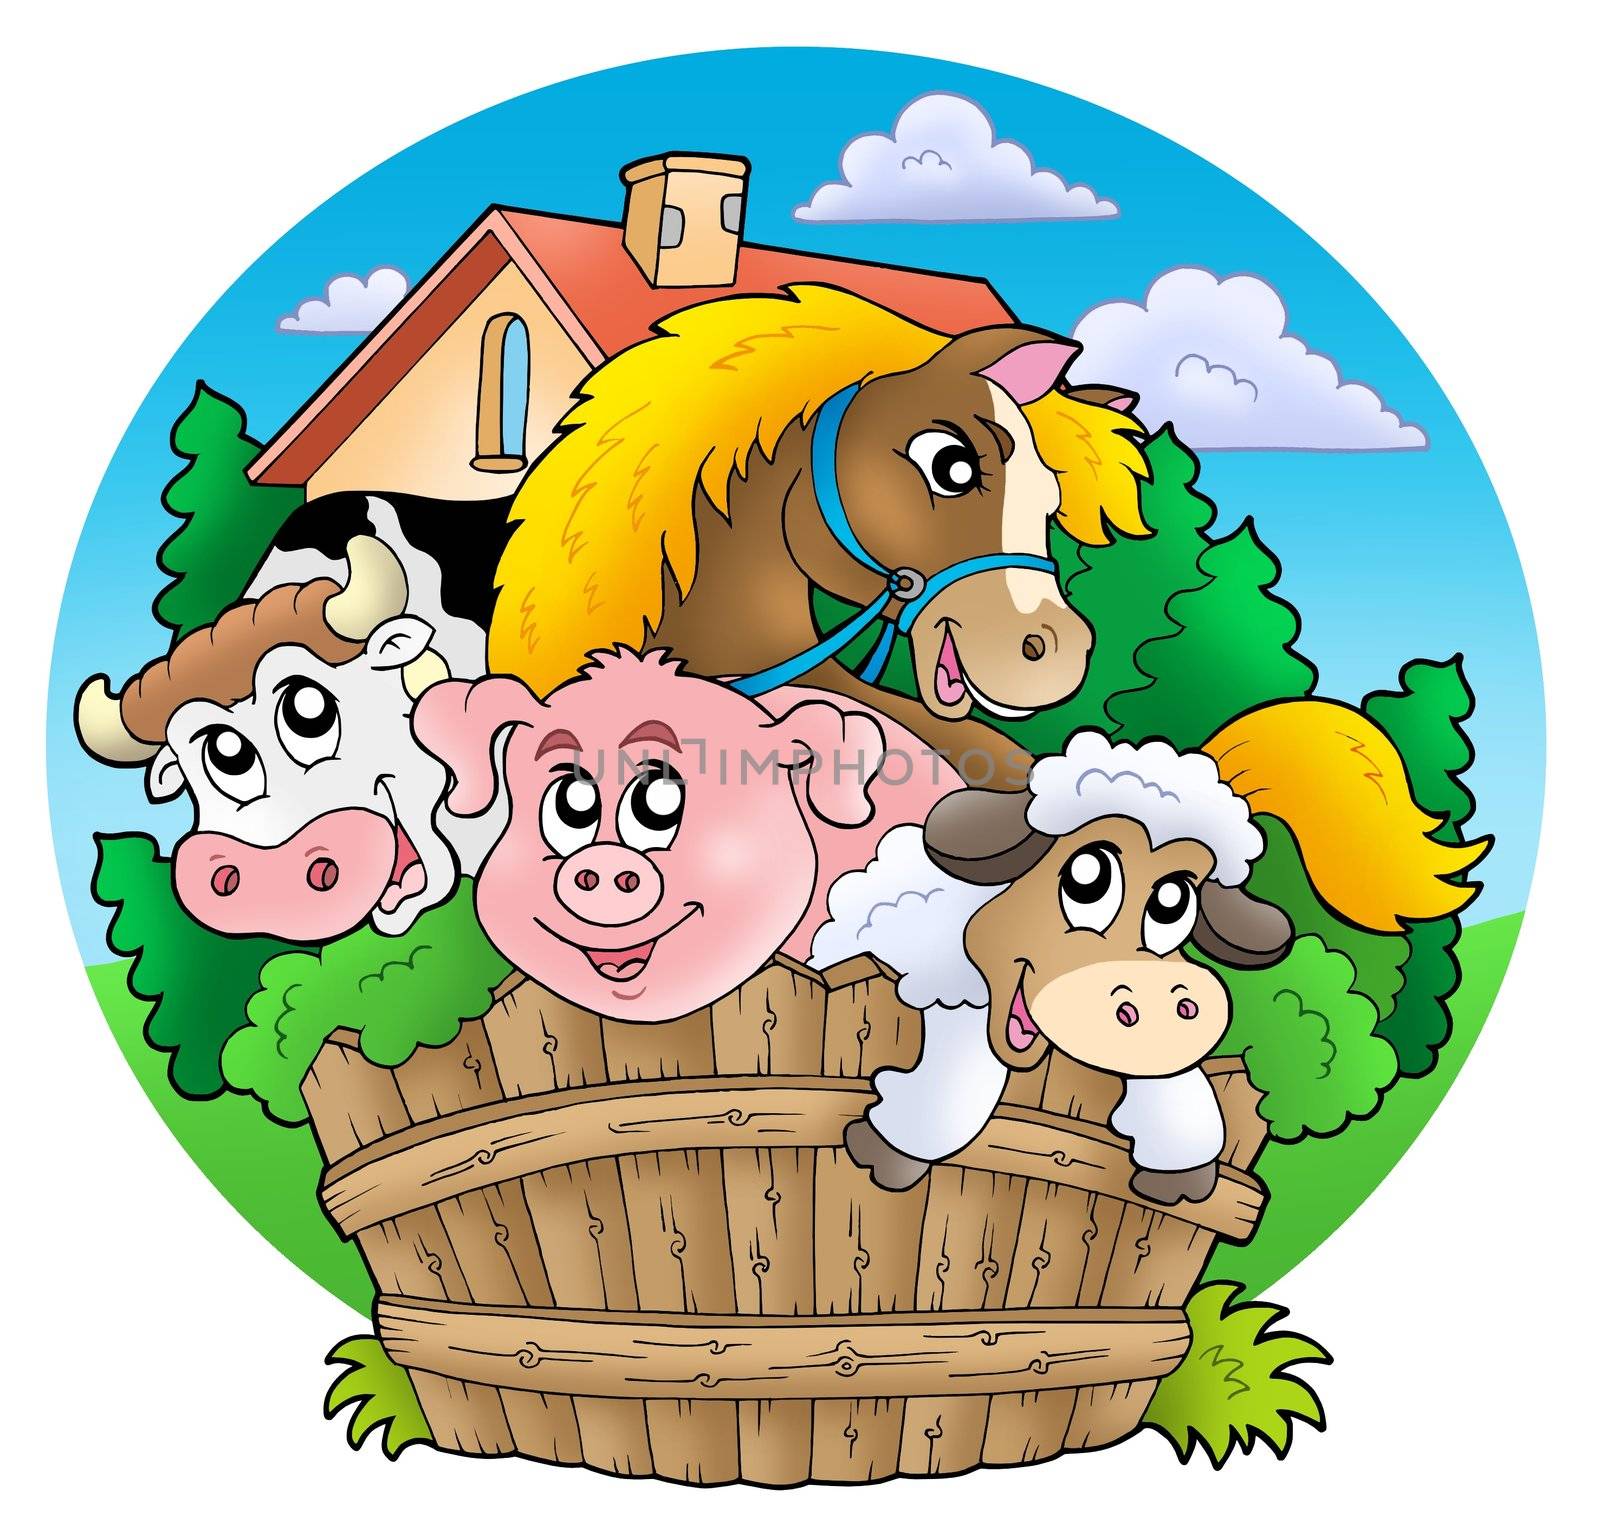 Group of country animals - color illustration.